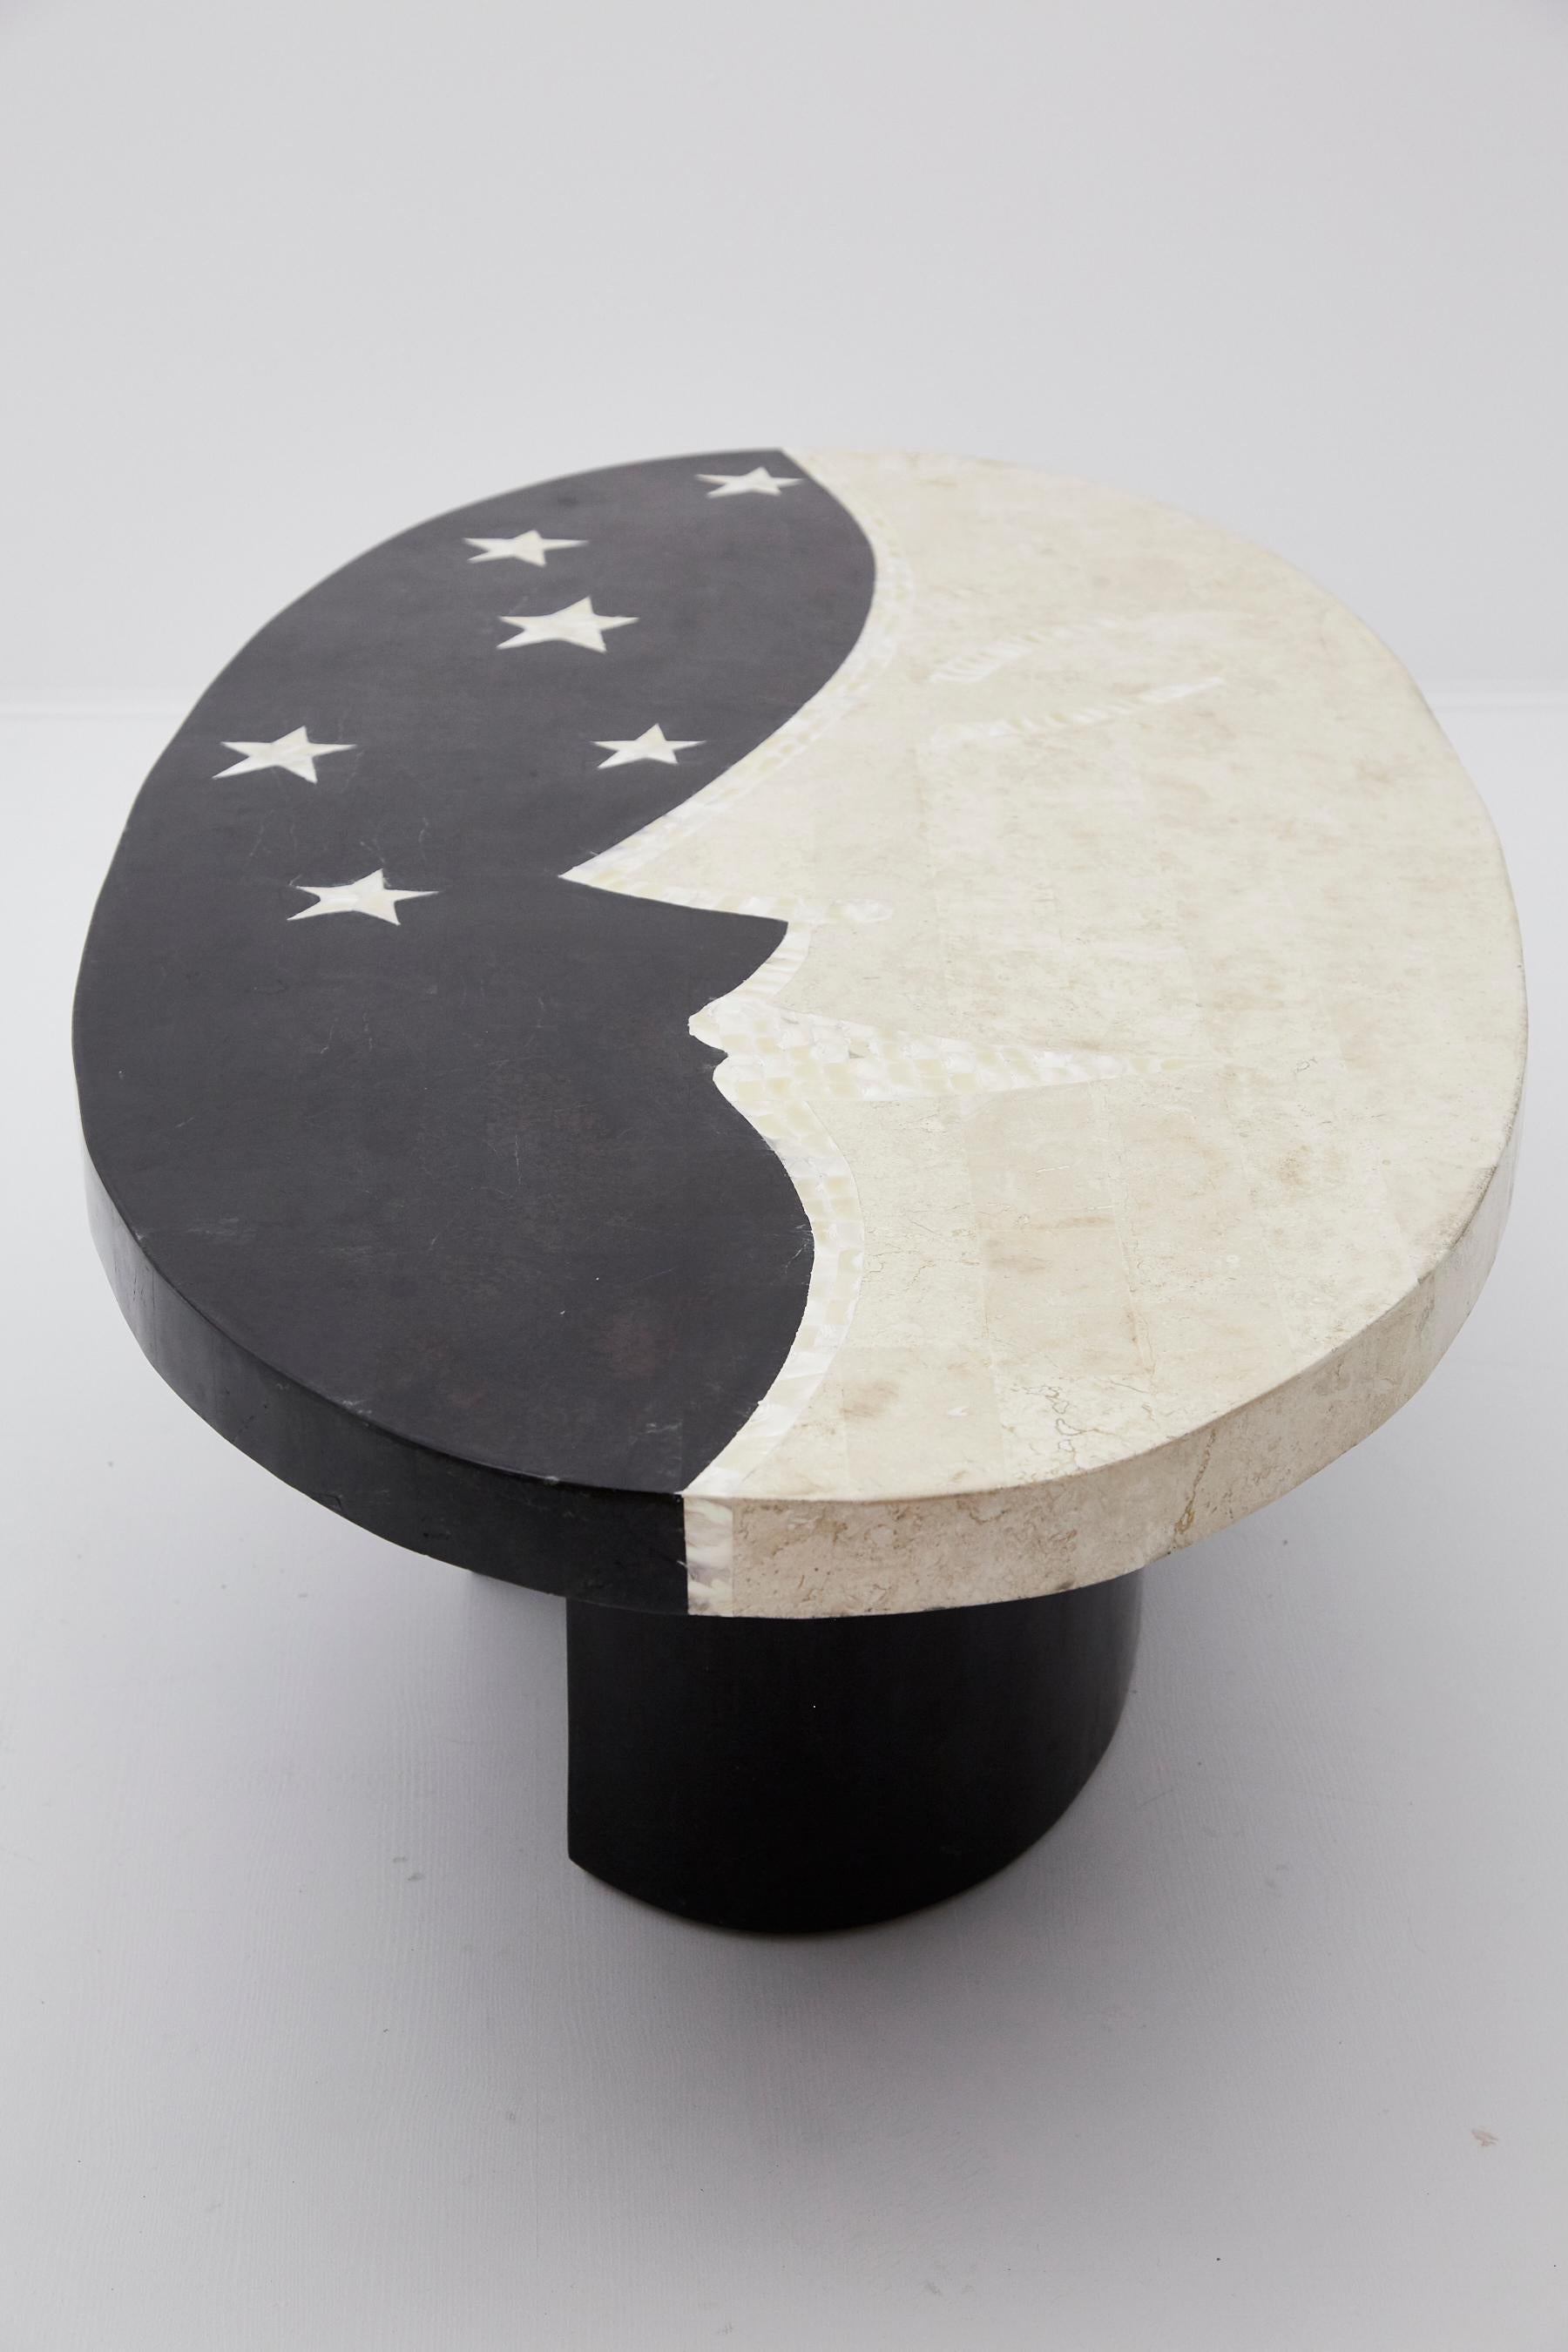 Tessellated black stone, white ivory stone and trocca shell hand inlaid into a charming half moon and stars design over fiberglass body. Oval shaped top with two part semicircle base.